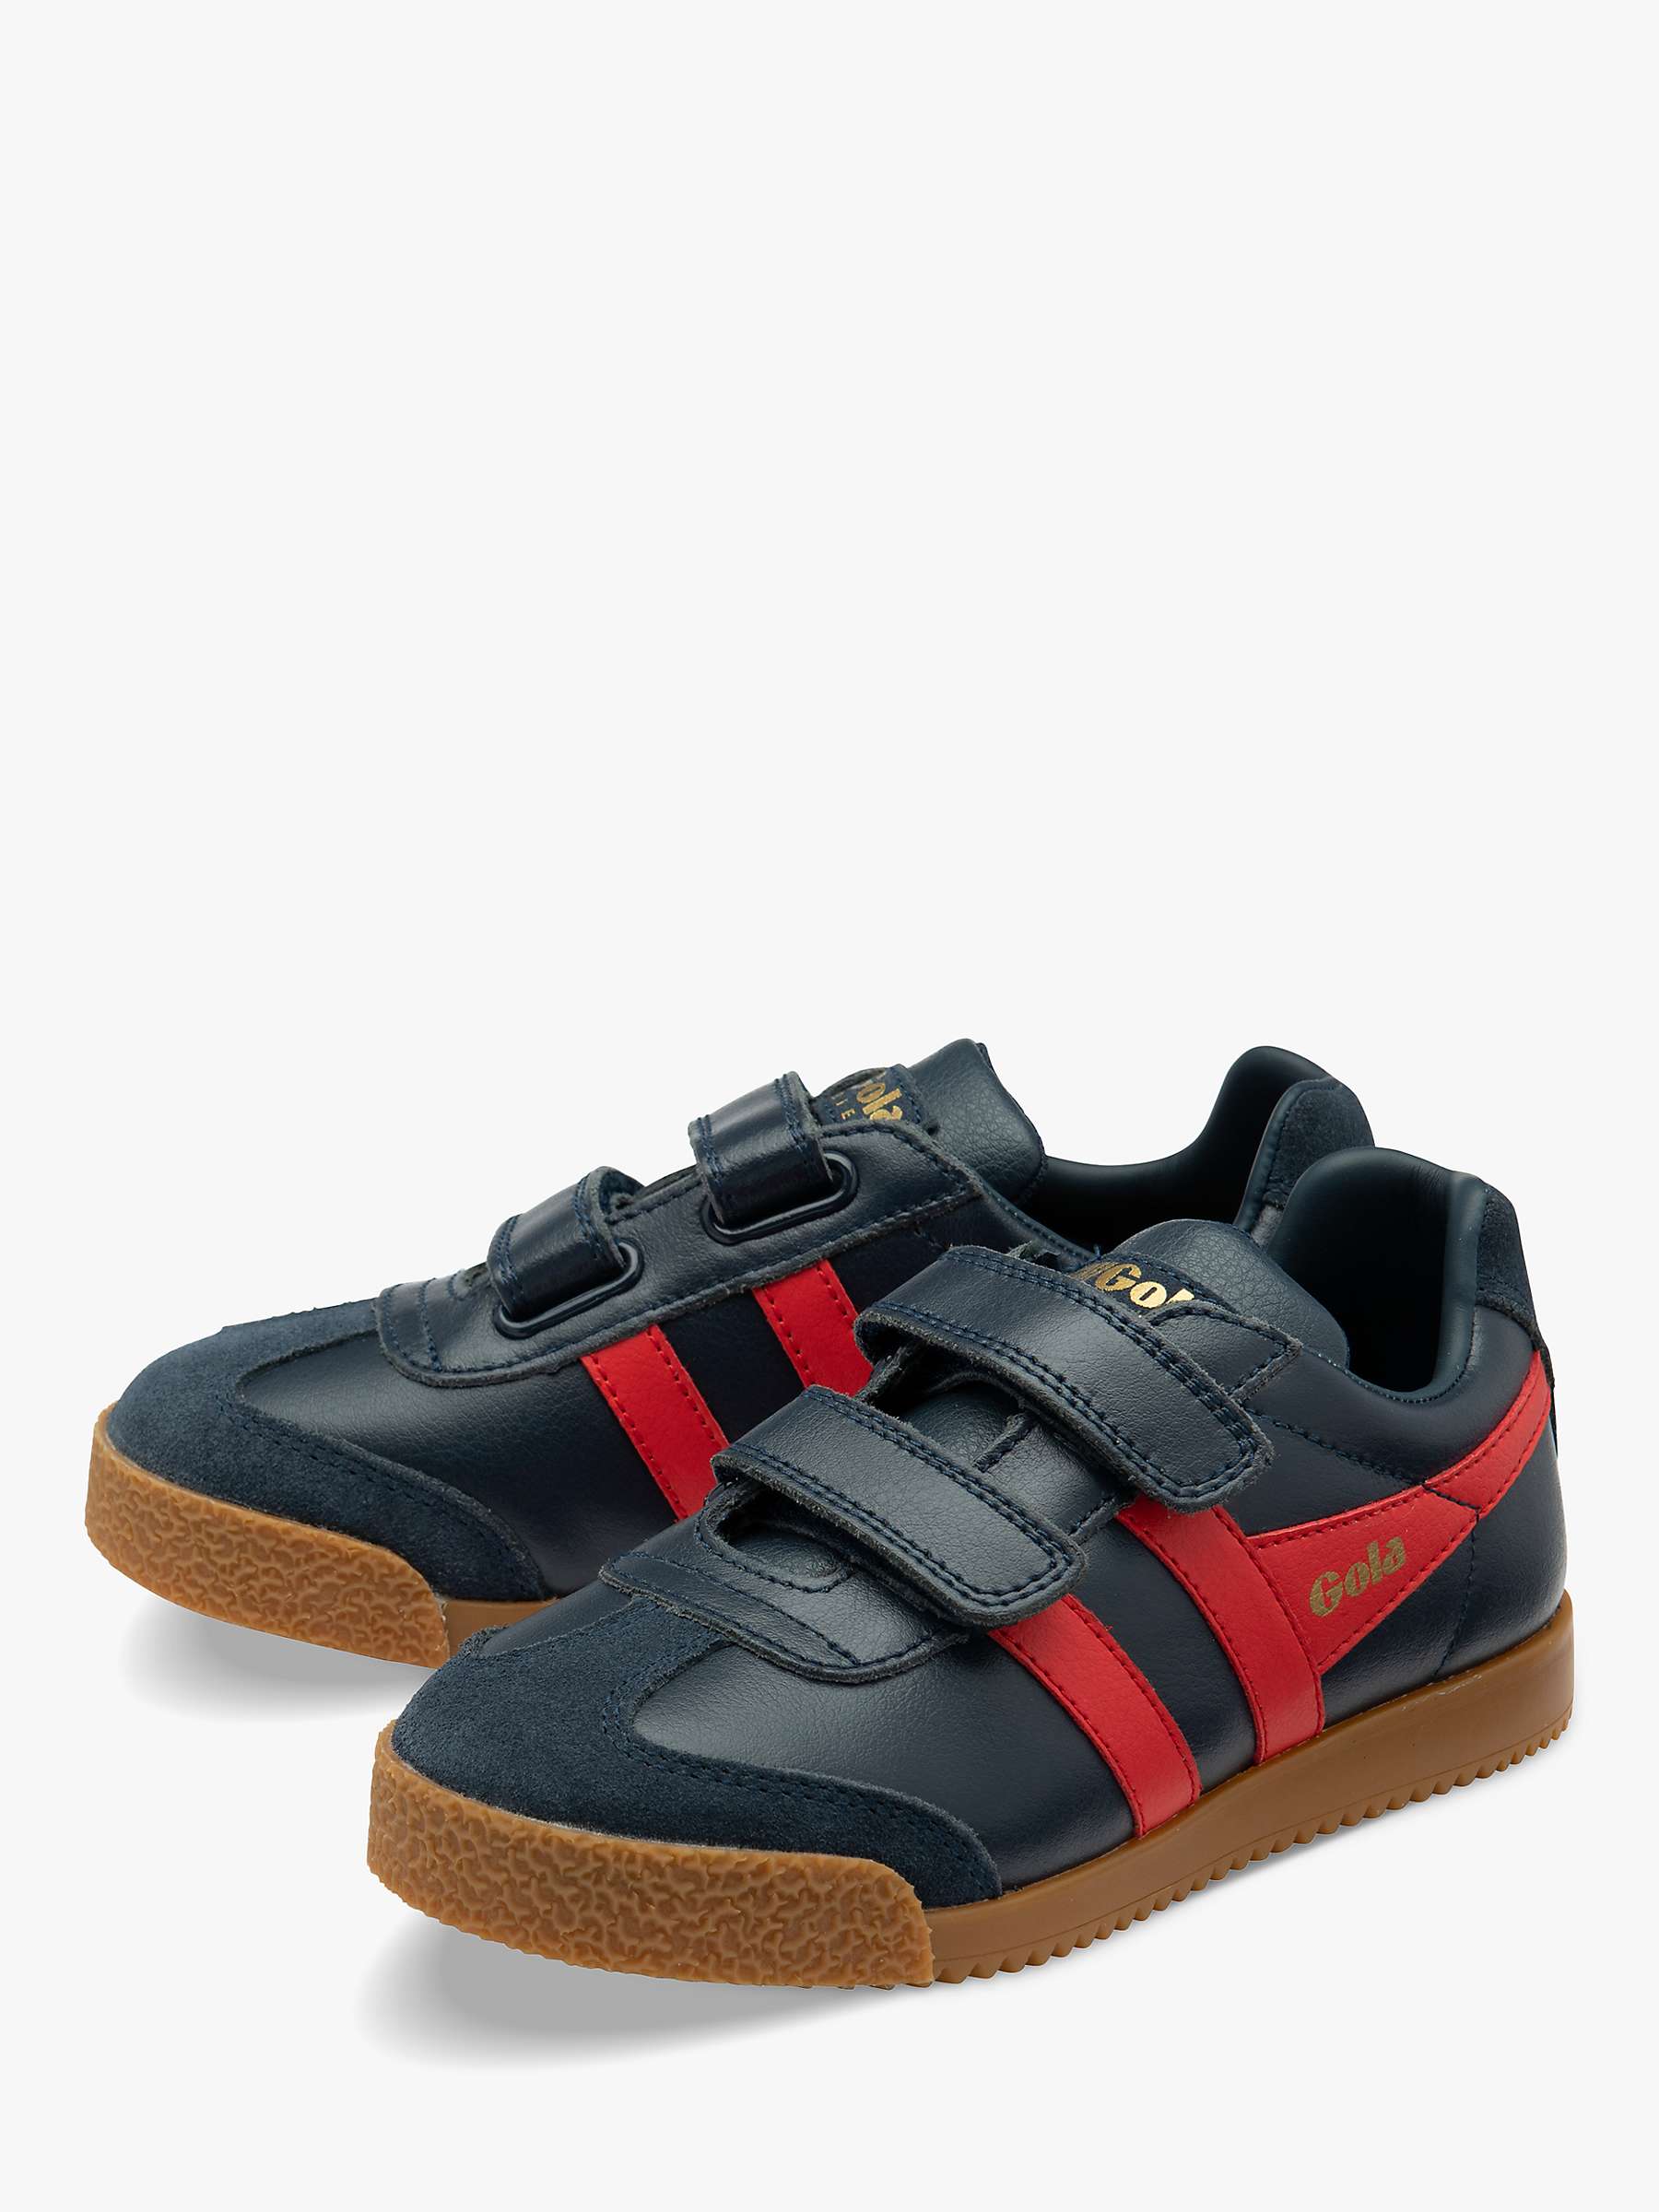 Buy Gola Kids' Classics Harrier Leather Strap Trainers, Navy/Red Online at johnlewis.com